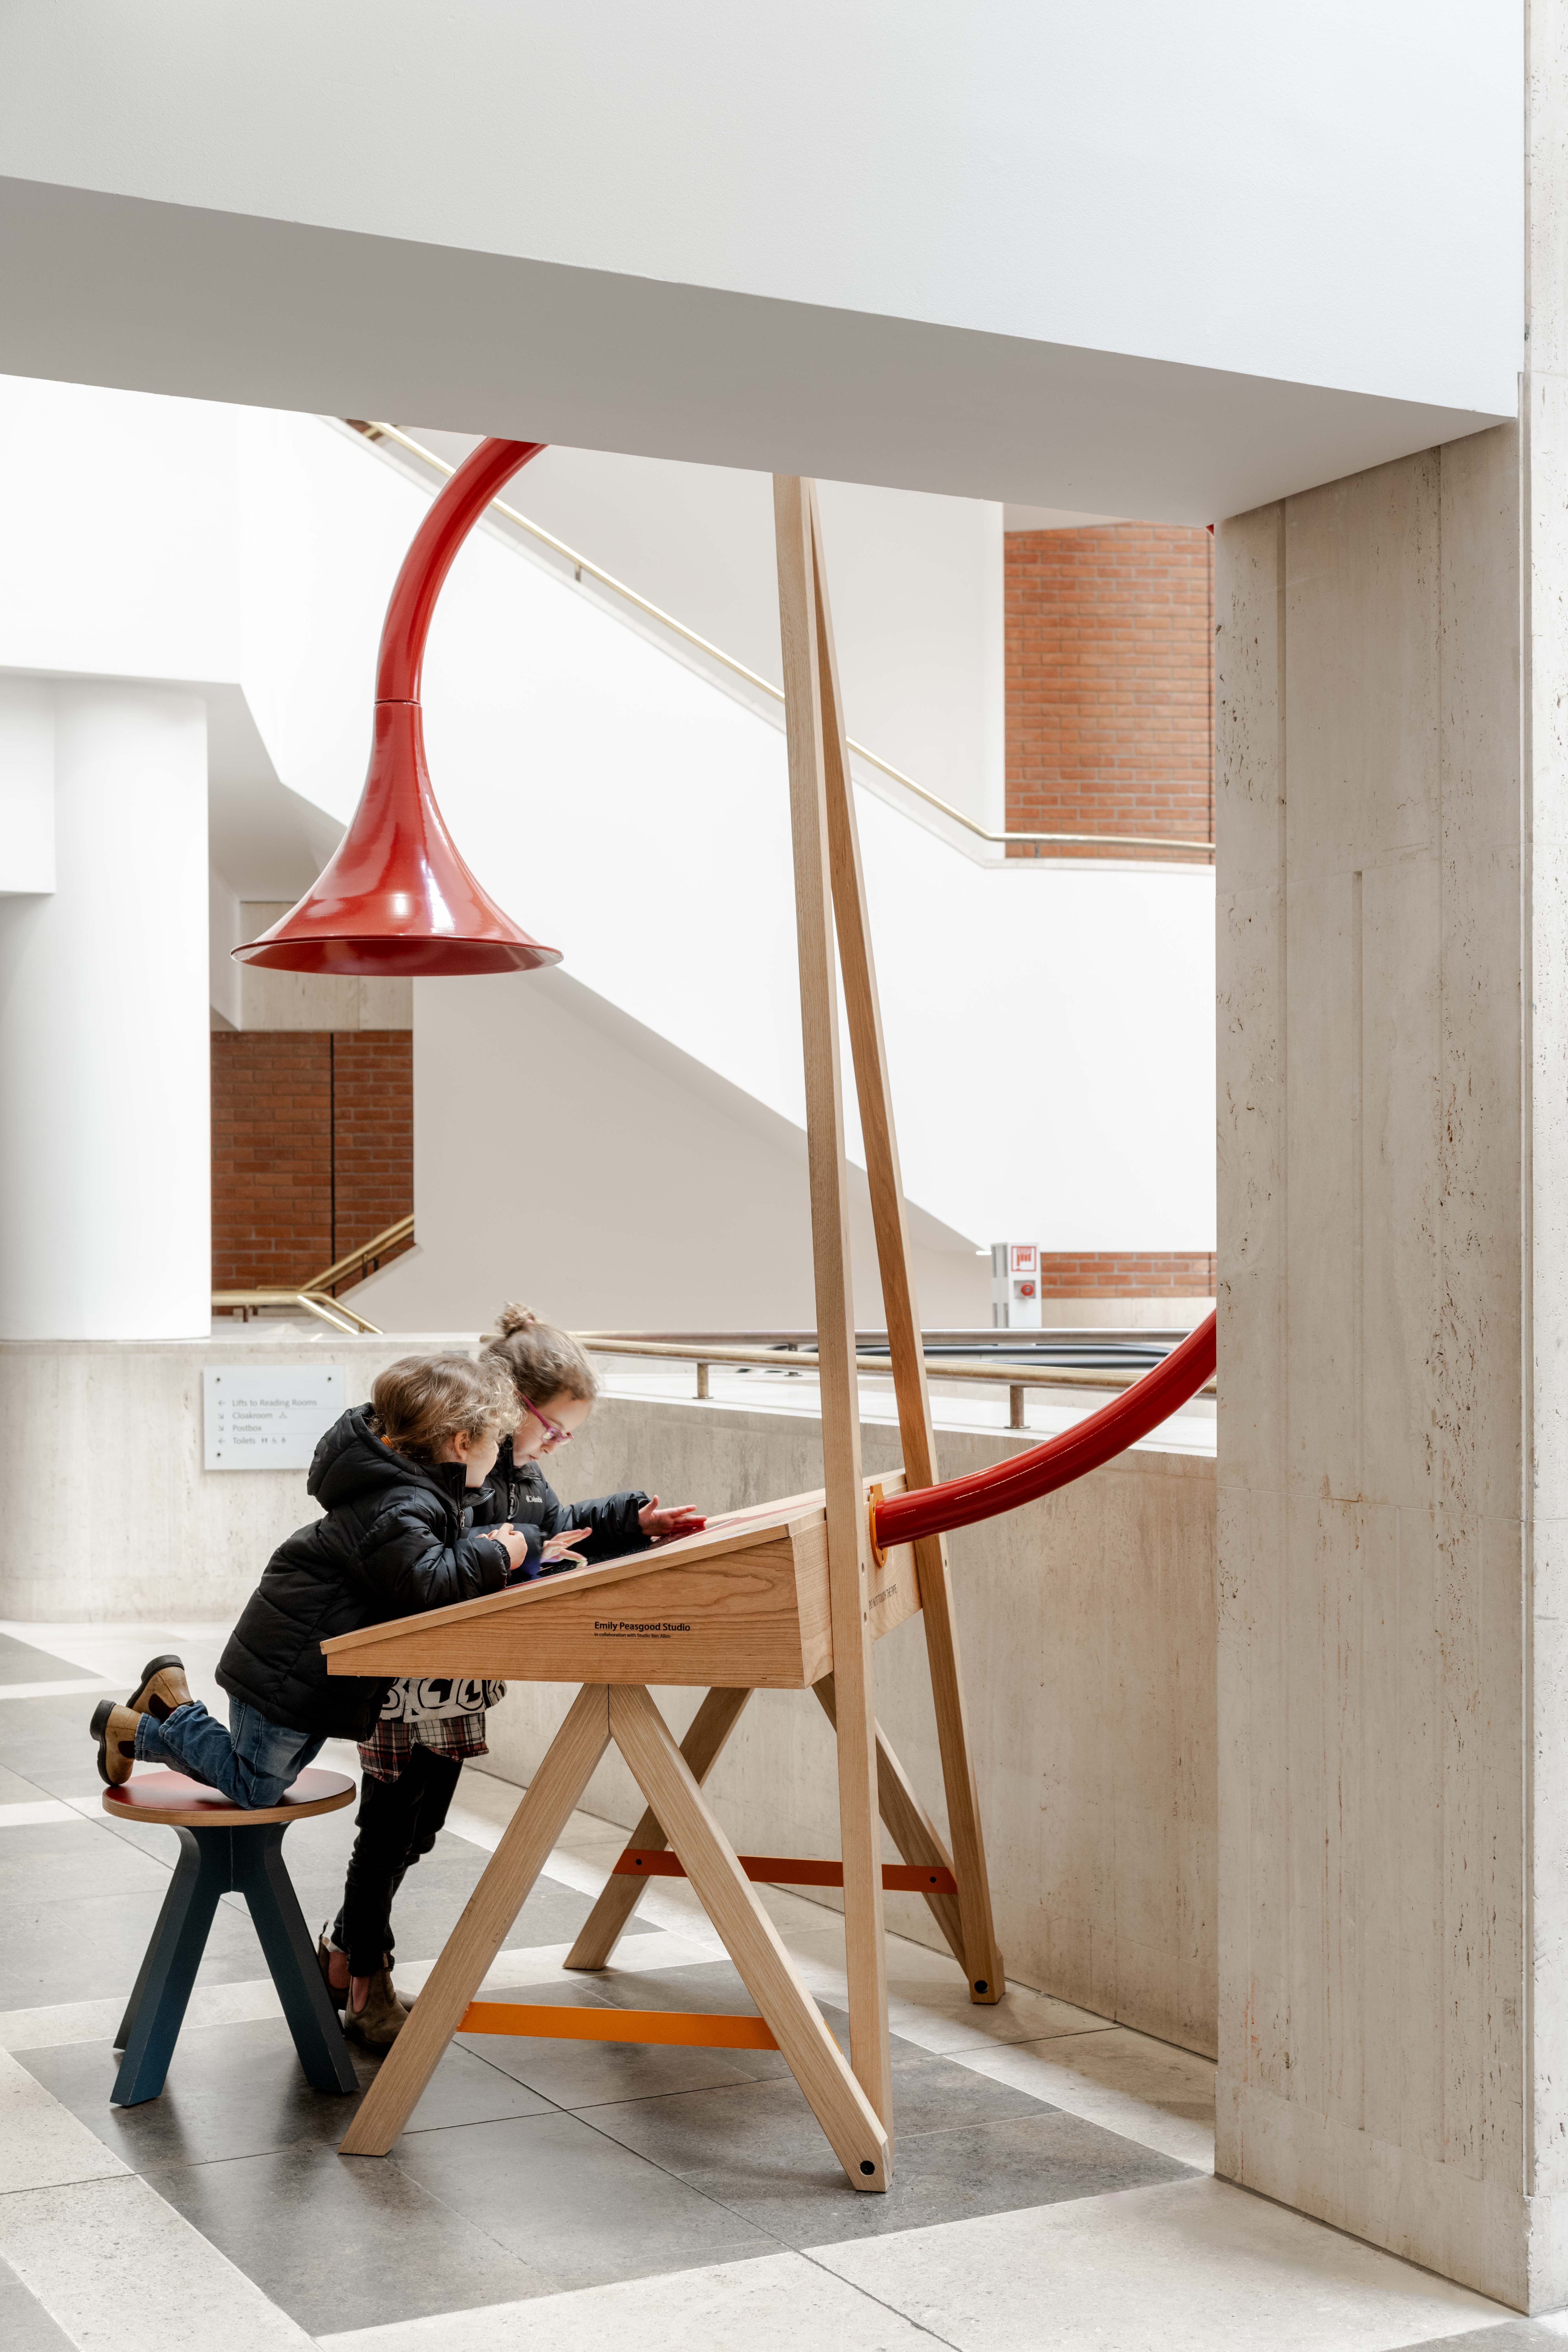 Image of Emily Peasgood's Listening Desk in The British Library. Two children are sat at the desk, playing with the interactive screen. A large horn is above their heads.